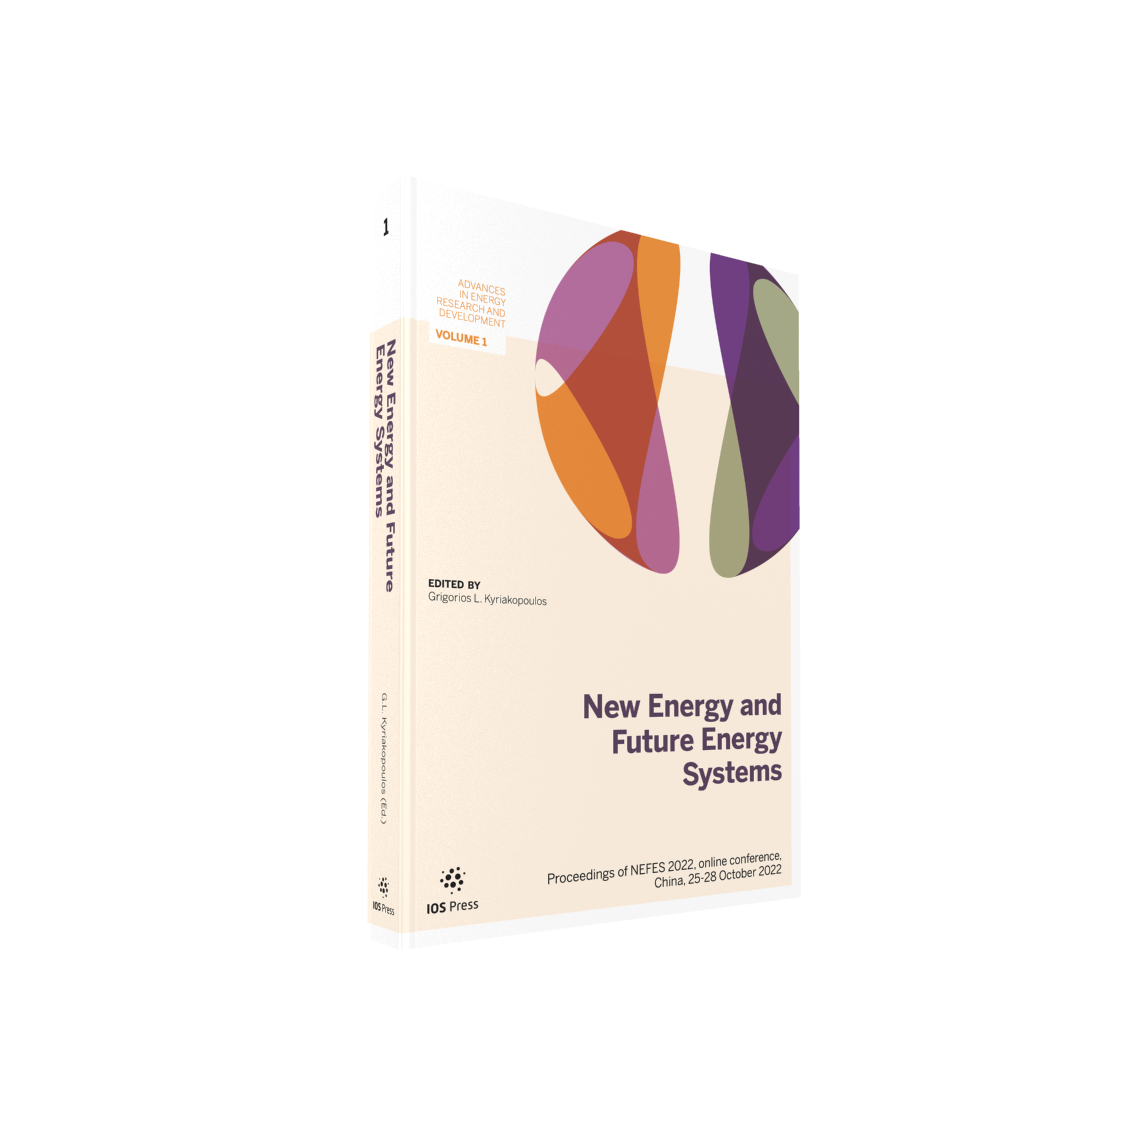 New Energy and Future Energy Systems (NEFES)